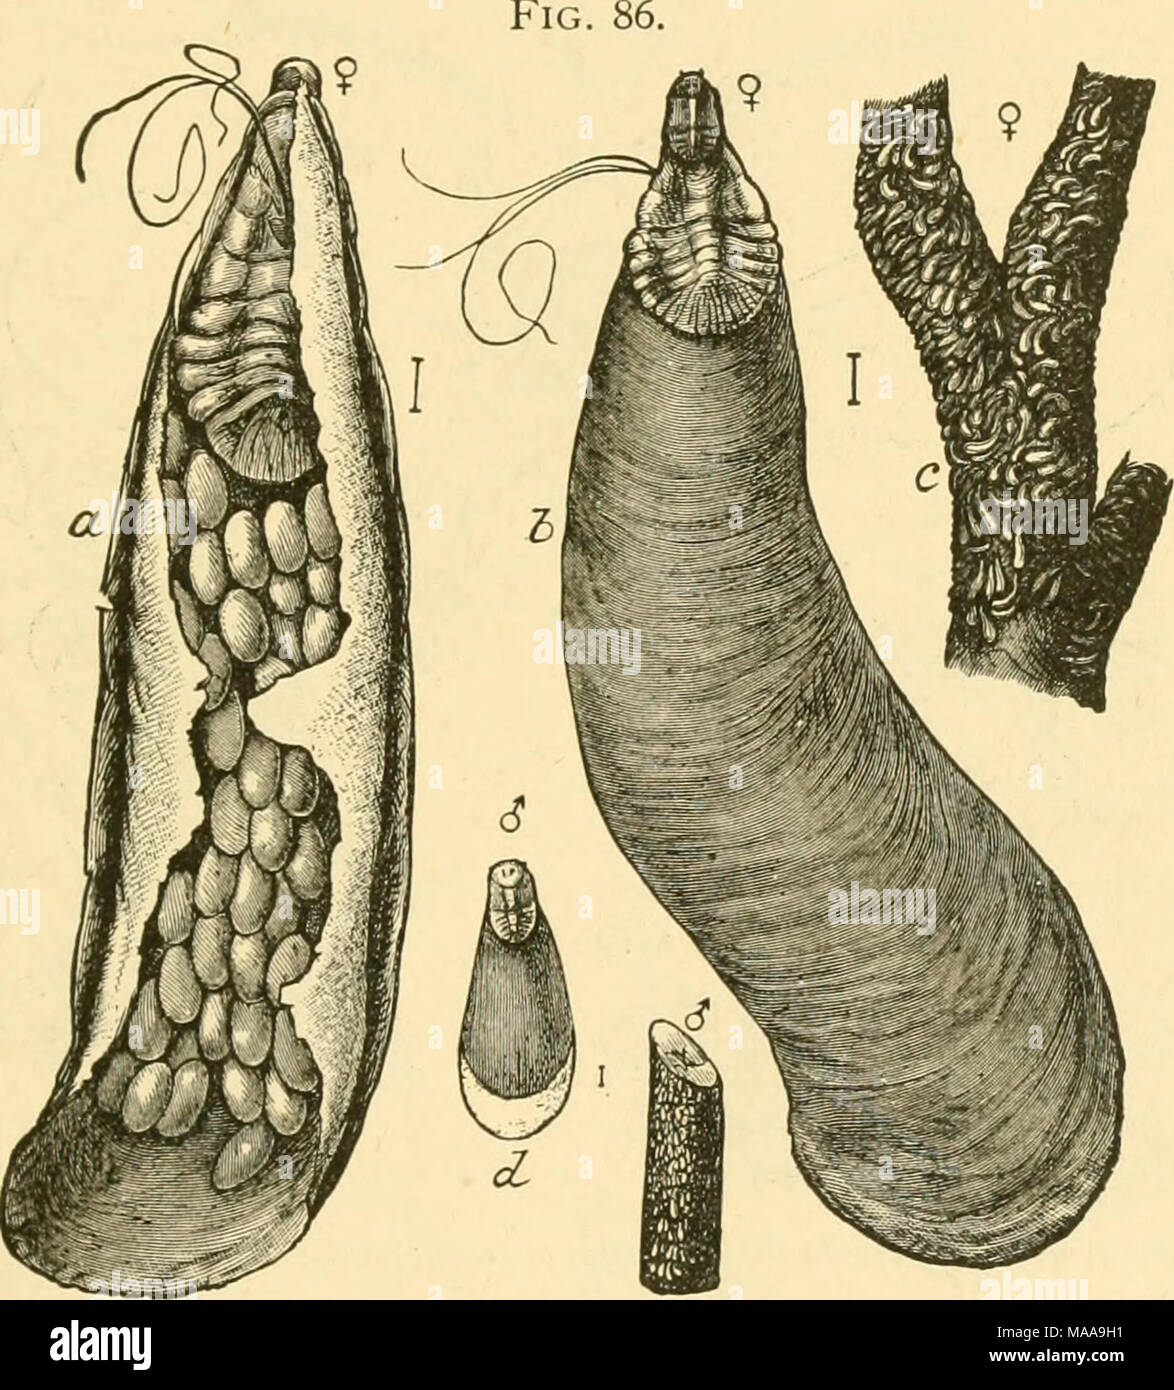 . Economic entomology for the farmer and fruit-grower . Oyster-shell scale, Mtila^f&gt;is pomorum.—a, female scale, from beneath, filled with eggs; b, same, from abo e , c, twig infested by female scales ; d, male scale and a twig infested therewith. Perhaps the most common forms of this series are the '' oyster- shell&quot; bark-lice, of which we have several species, deriving their common name from the fact that the scales have a marked resem- blance to the shells of some oysters. In the Northern United States Mytilaspis pomorum is the common form, infesting apple Stock Photo